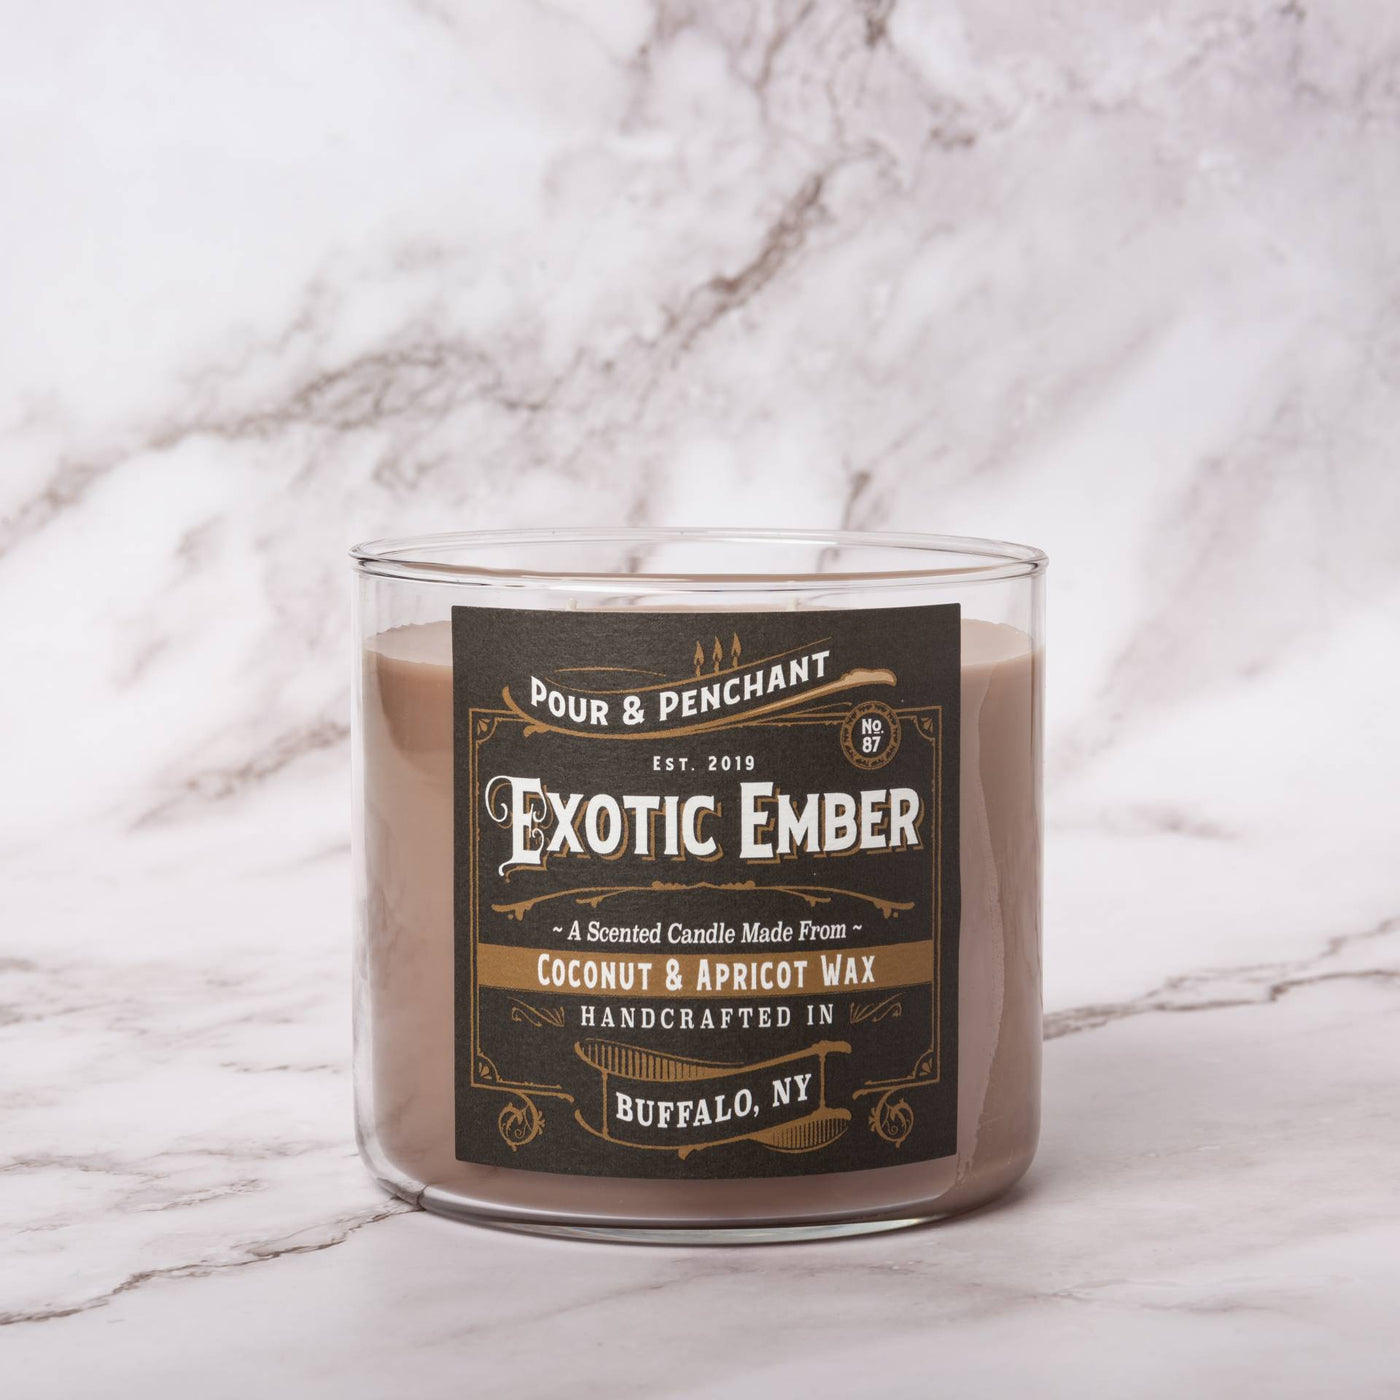 Pour & Penchant 16.5 oz Scented Candle - EXOTIC EMBER no.87 - Moroccan Cashmere & Smoked Oudwood